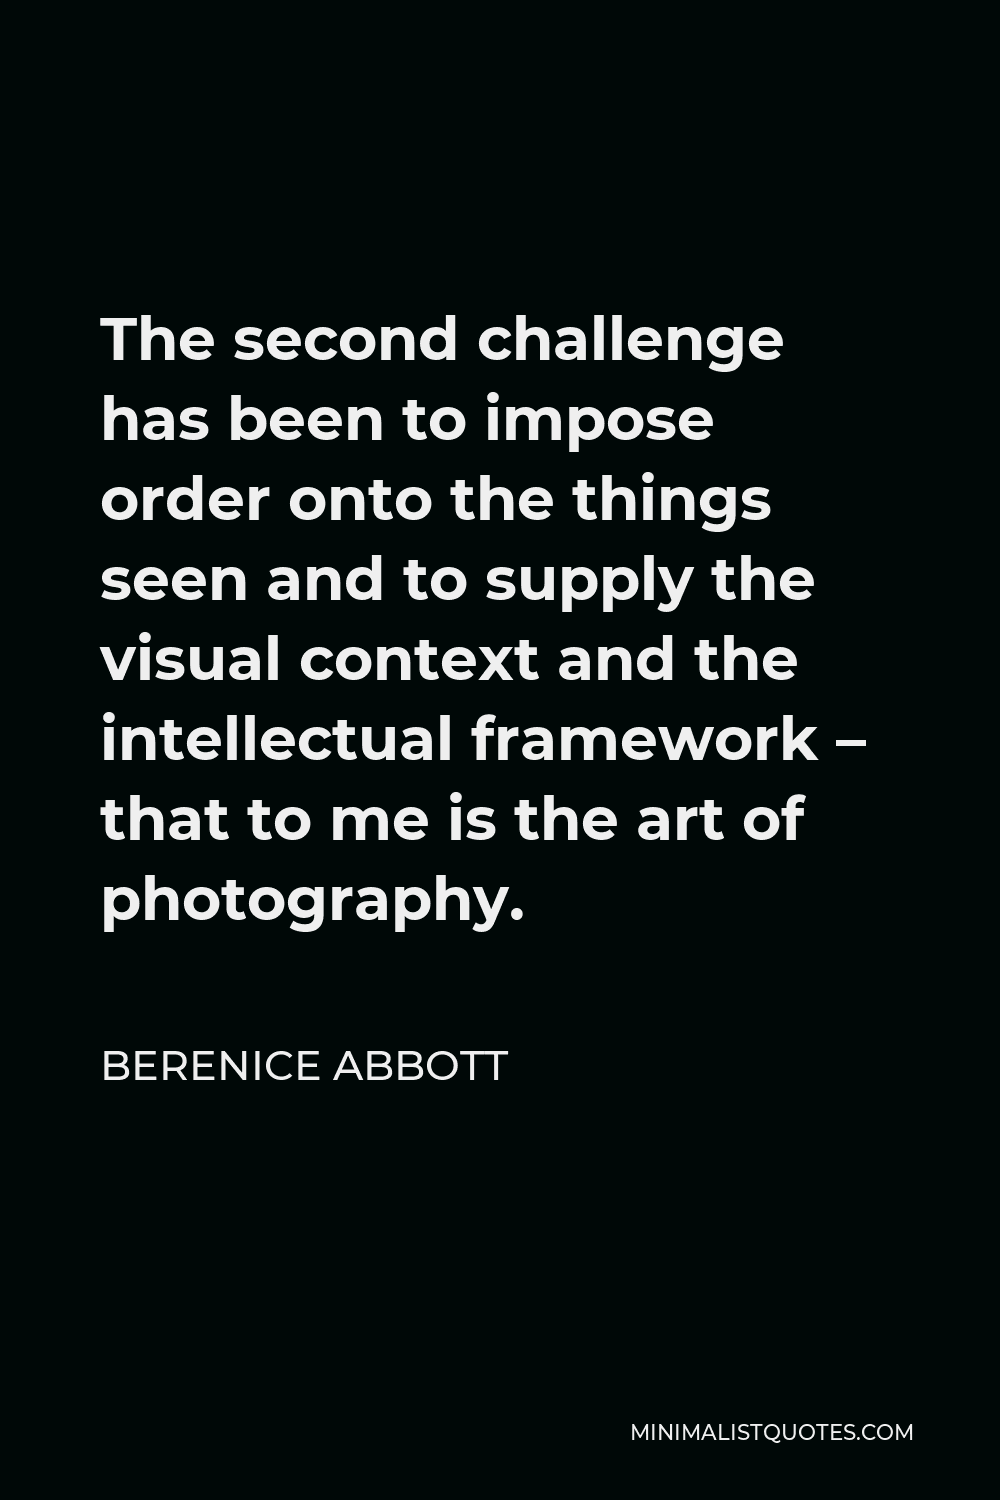 Berenice Abbott Quote - The second challenge has been to impose order onto the things seen and to supply the visual context and the intellectual framework – that to me is the art of photography.